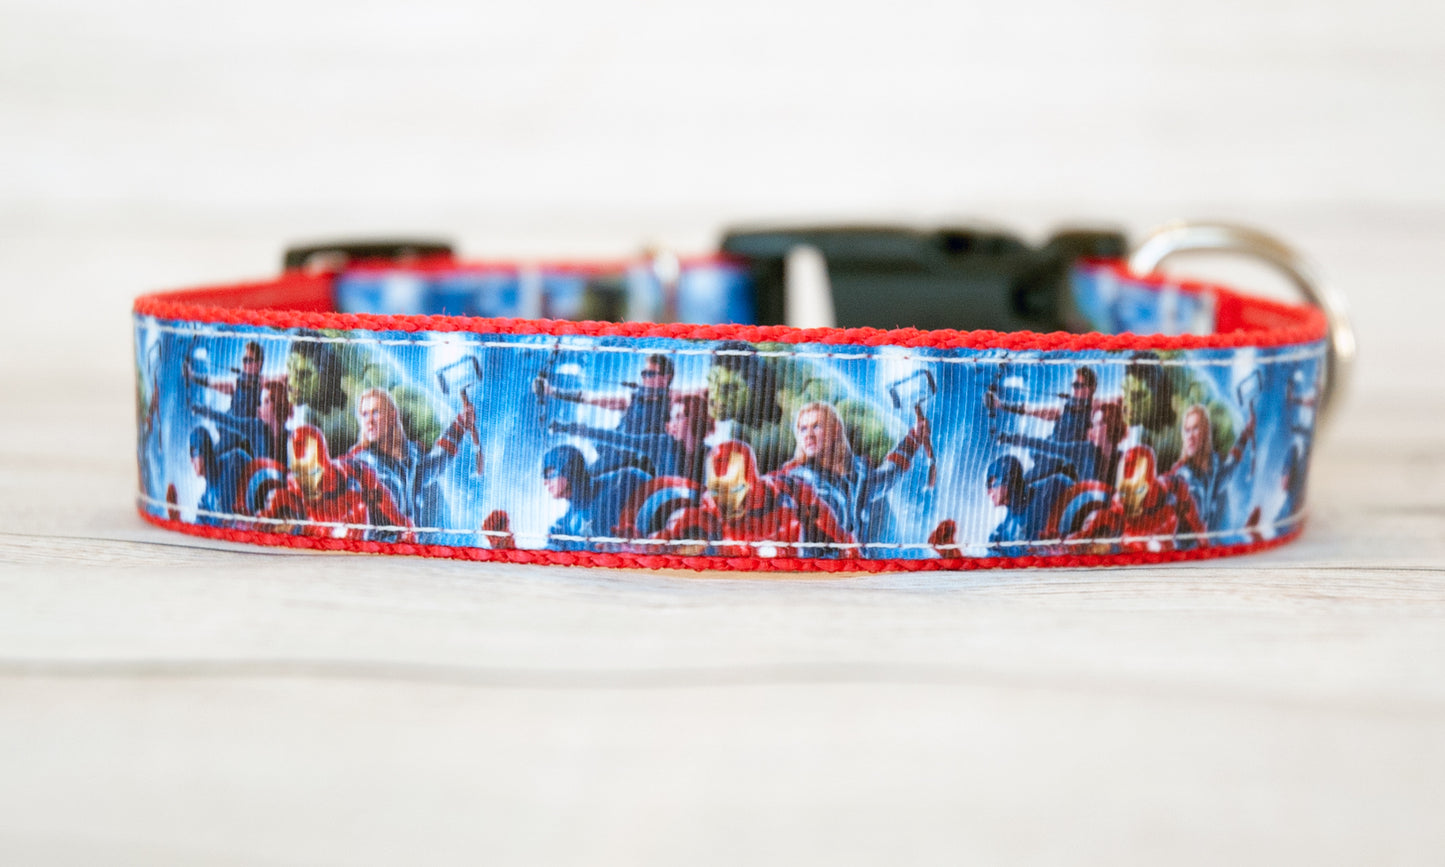 Avengers Superhero dog collar and/or leash. 1 inch wide